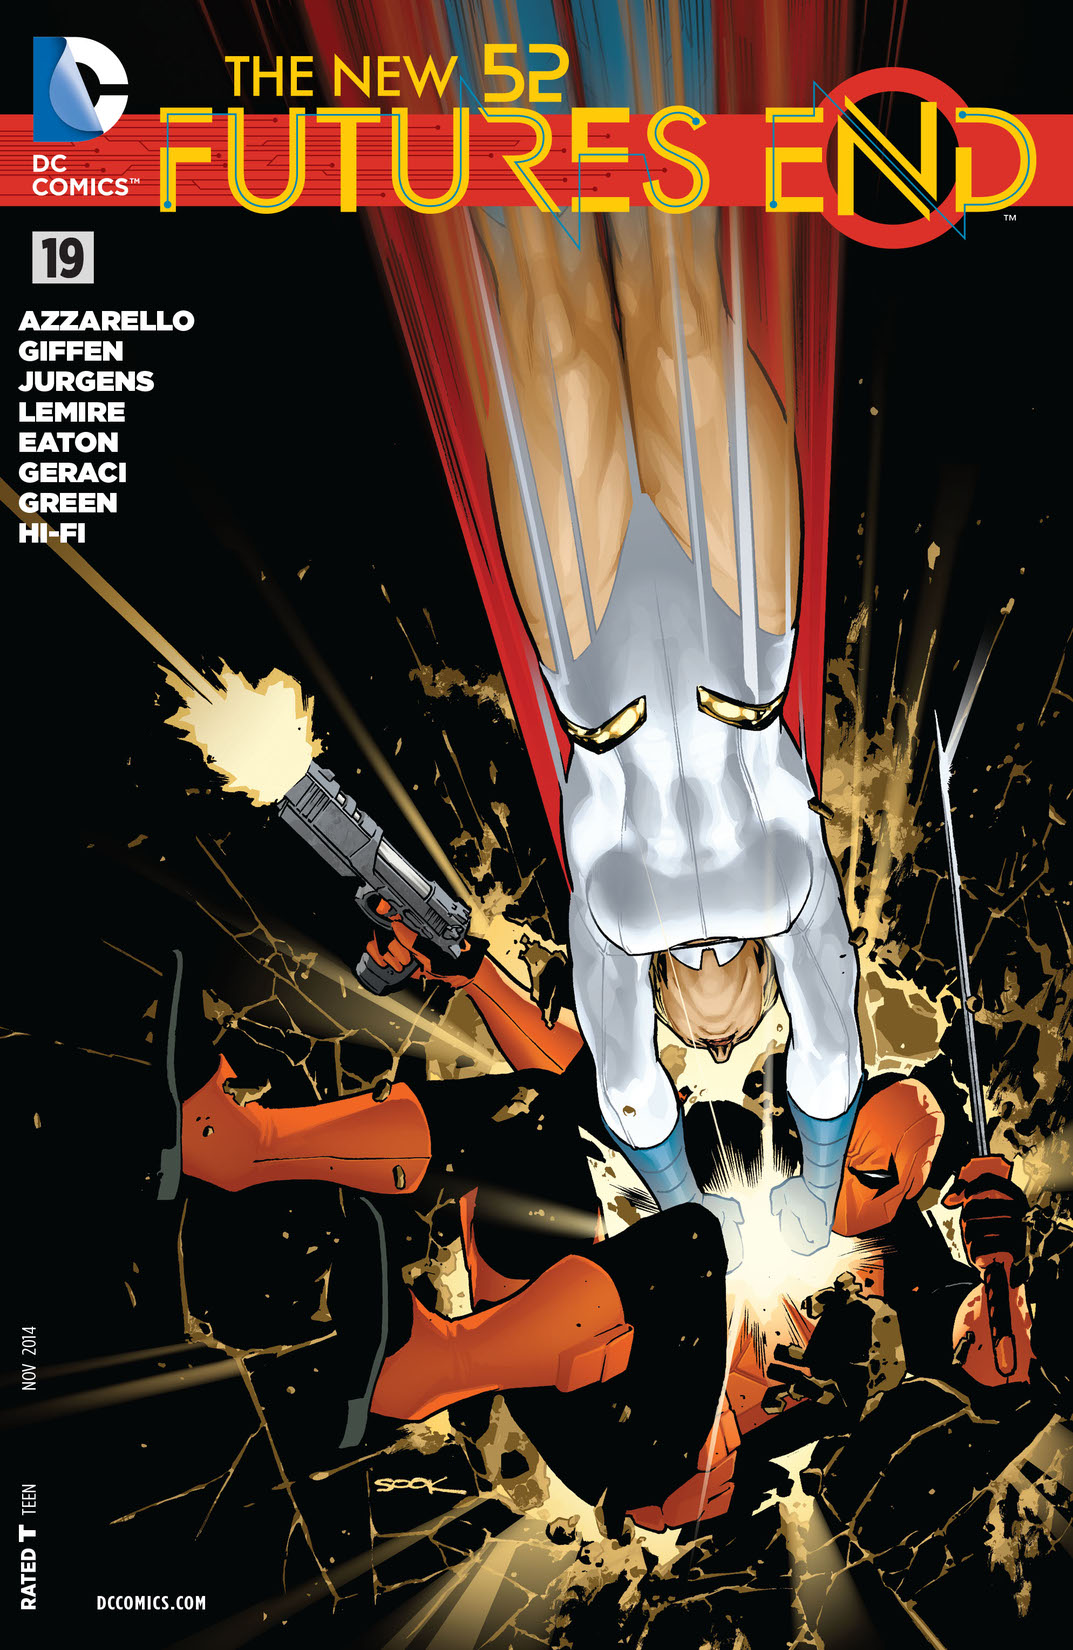 The New 52: Futures End #19 preview images